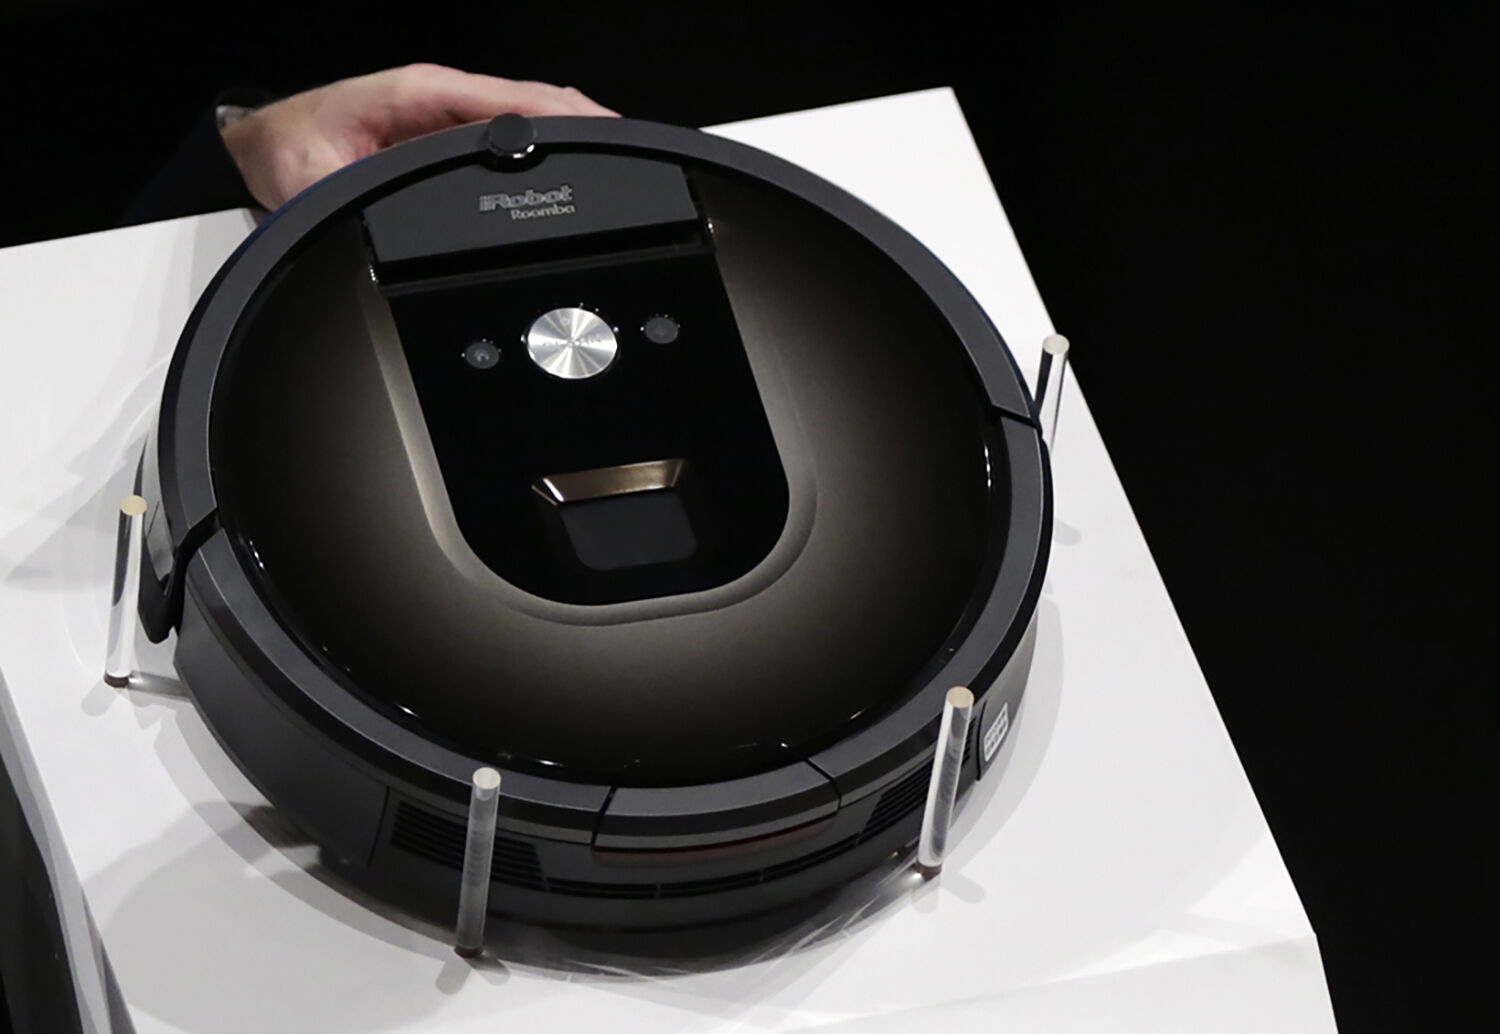 <p>FILE - A Roomba 980 vacuum cleaning robot is presented during a presentation in Tokyo, Tuesday, Sept. 29, 2015. Amazon on Monday called off its proposed acquisition of iRobot, which was facing antitrust scrutiny on both sides of the Atlantic, with the ecommerce giant blaming “undue and disproportionate regulatory hurdles.” (AP Photo/Eugene Hoshiko, File)</p>   PHOTO CREDIT: Eugene Hoshiko